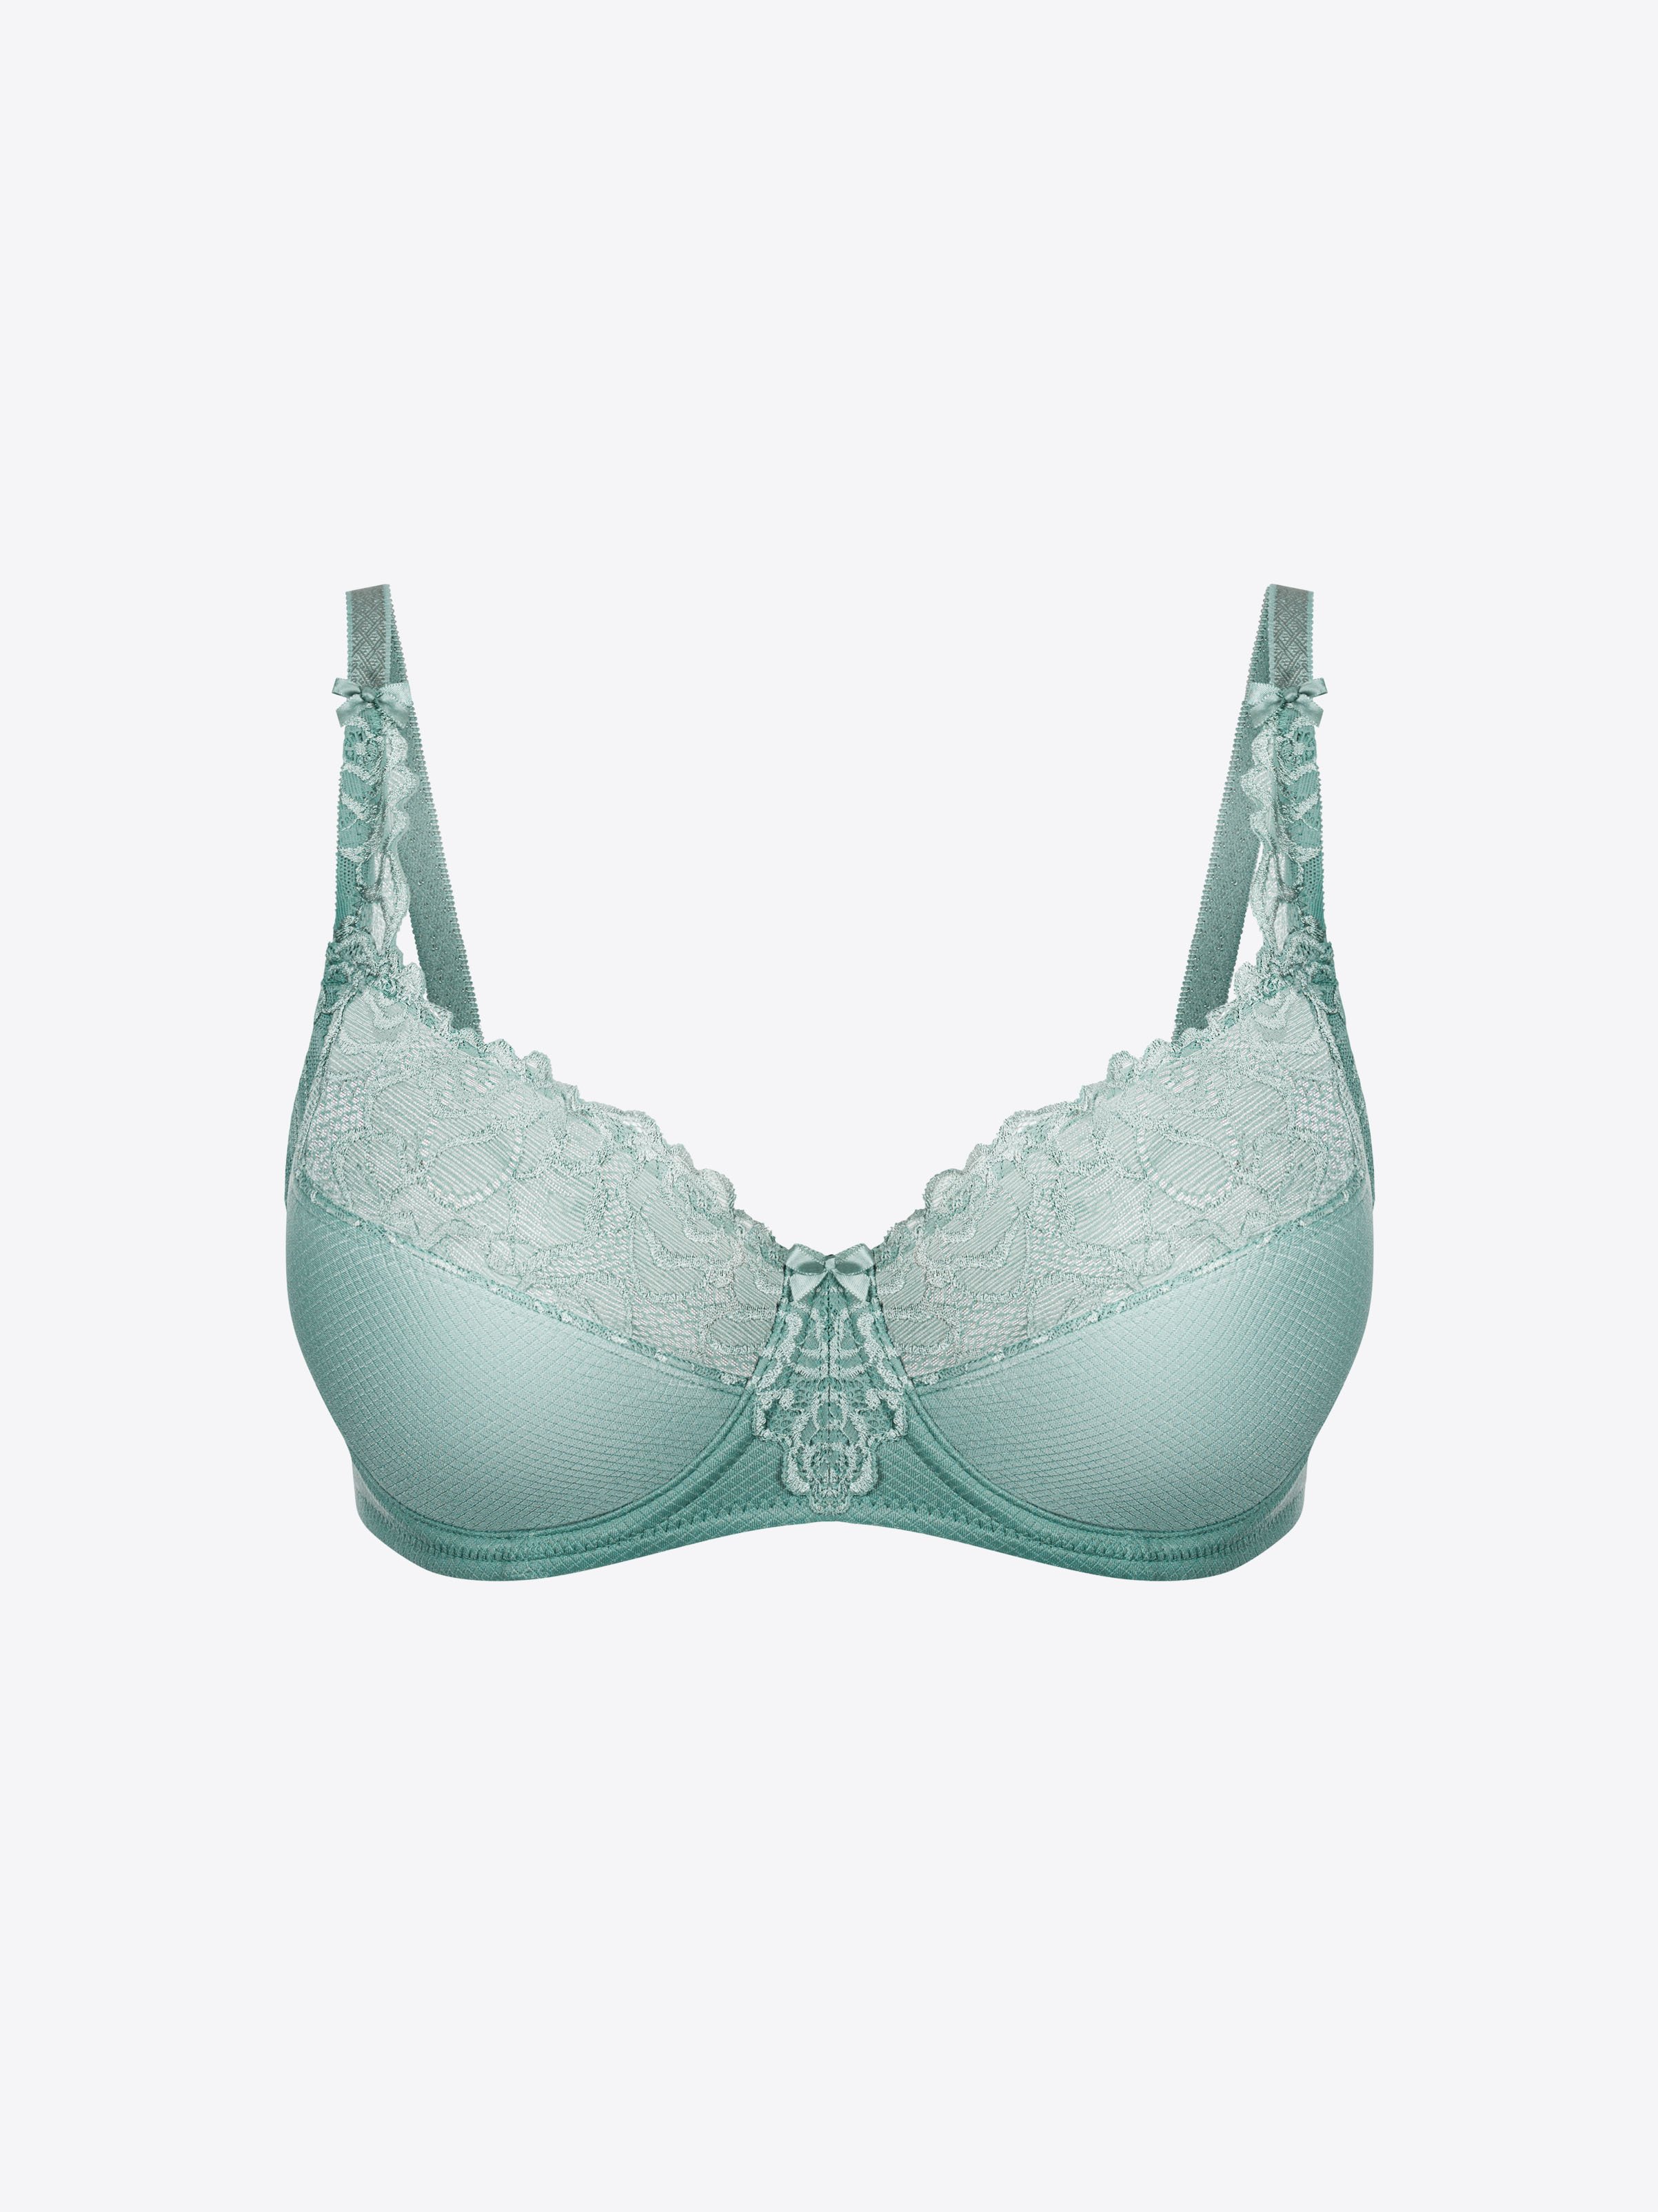 Florence Full Support Full Cup Bra - Chinois Green - CA$53.70 - CHANGE  Lingerie